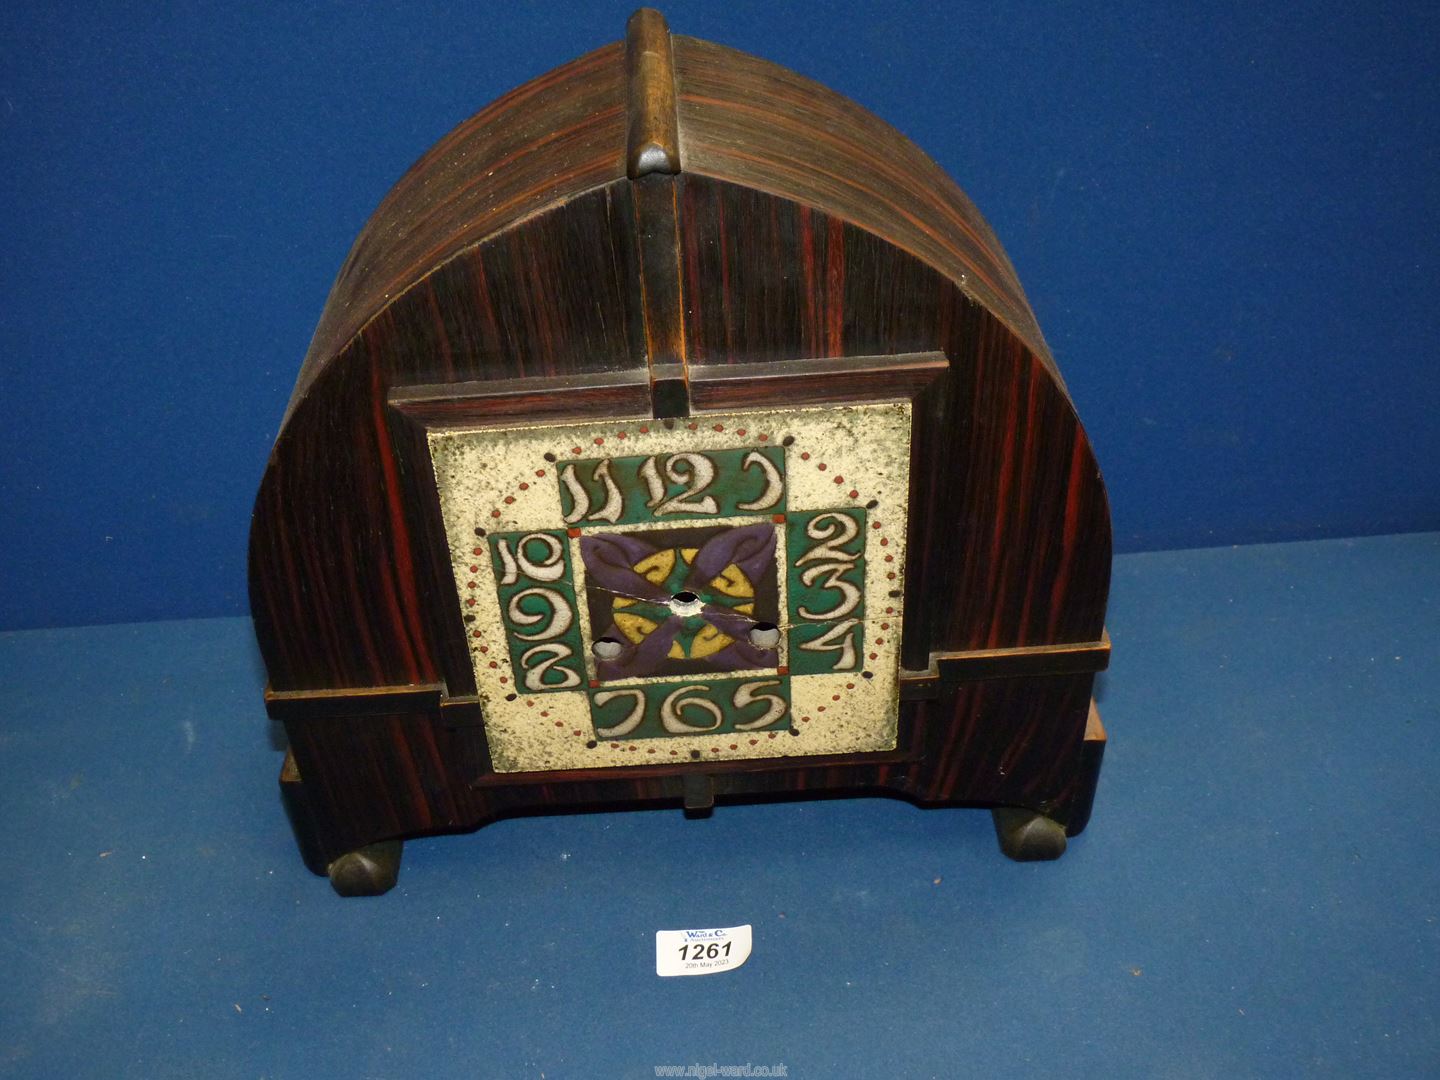 An arts and crafts Rosewood cased Mantel Clock with Mackintosh tiled style face,